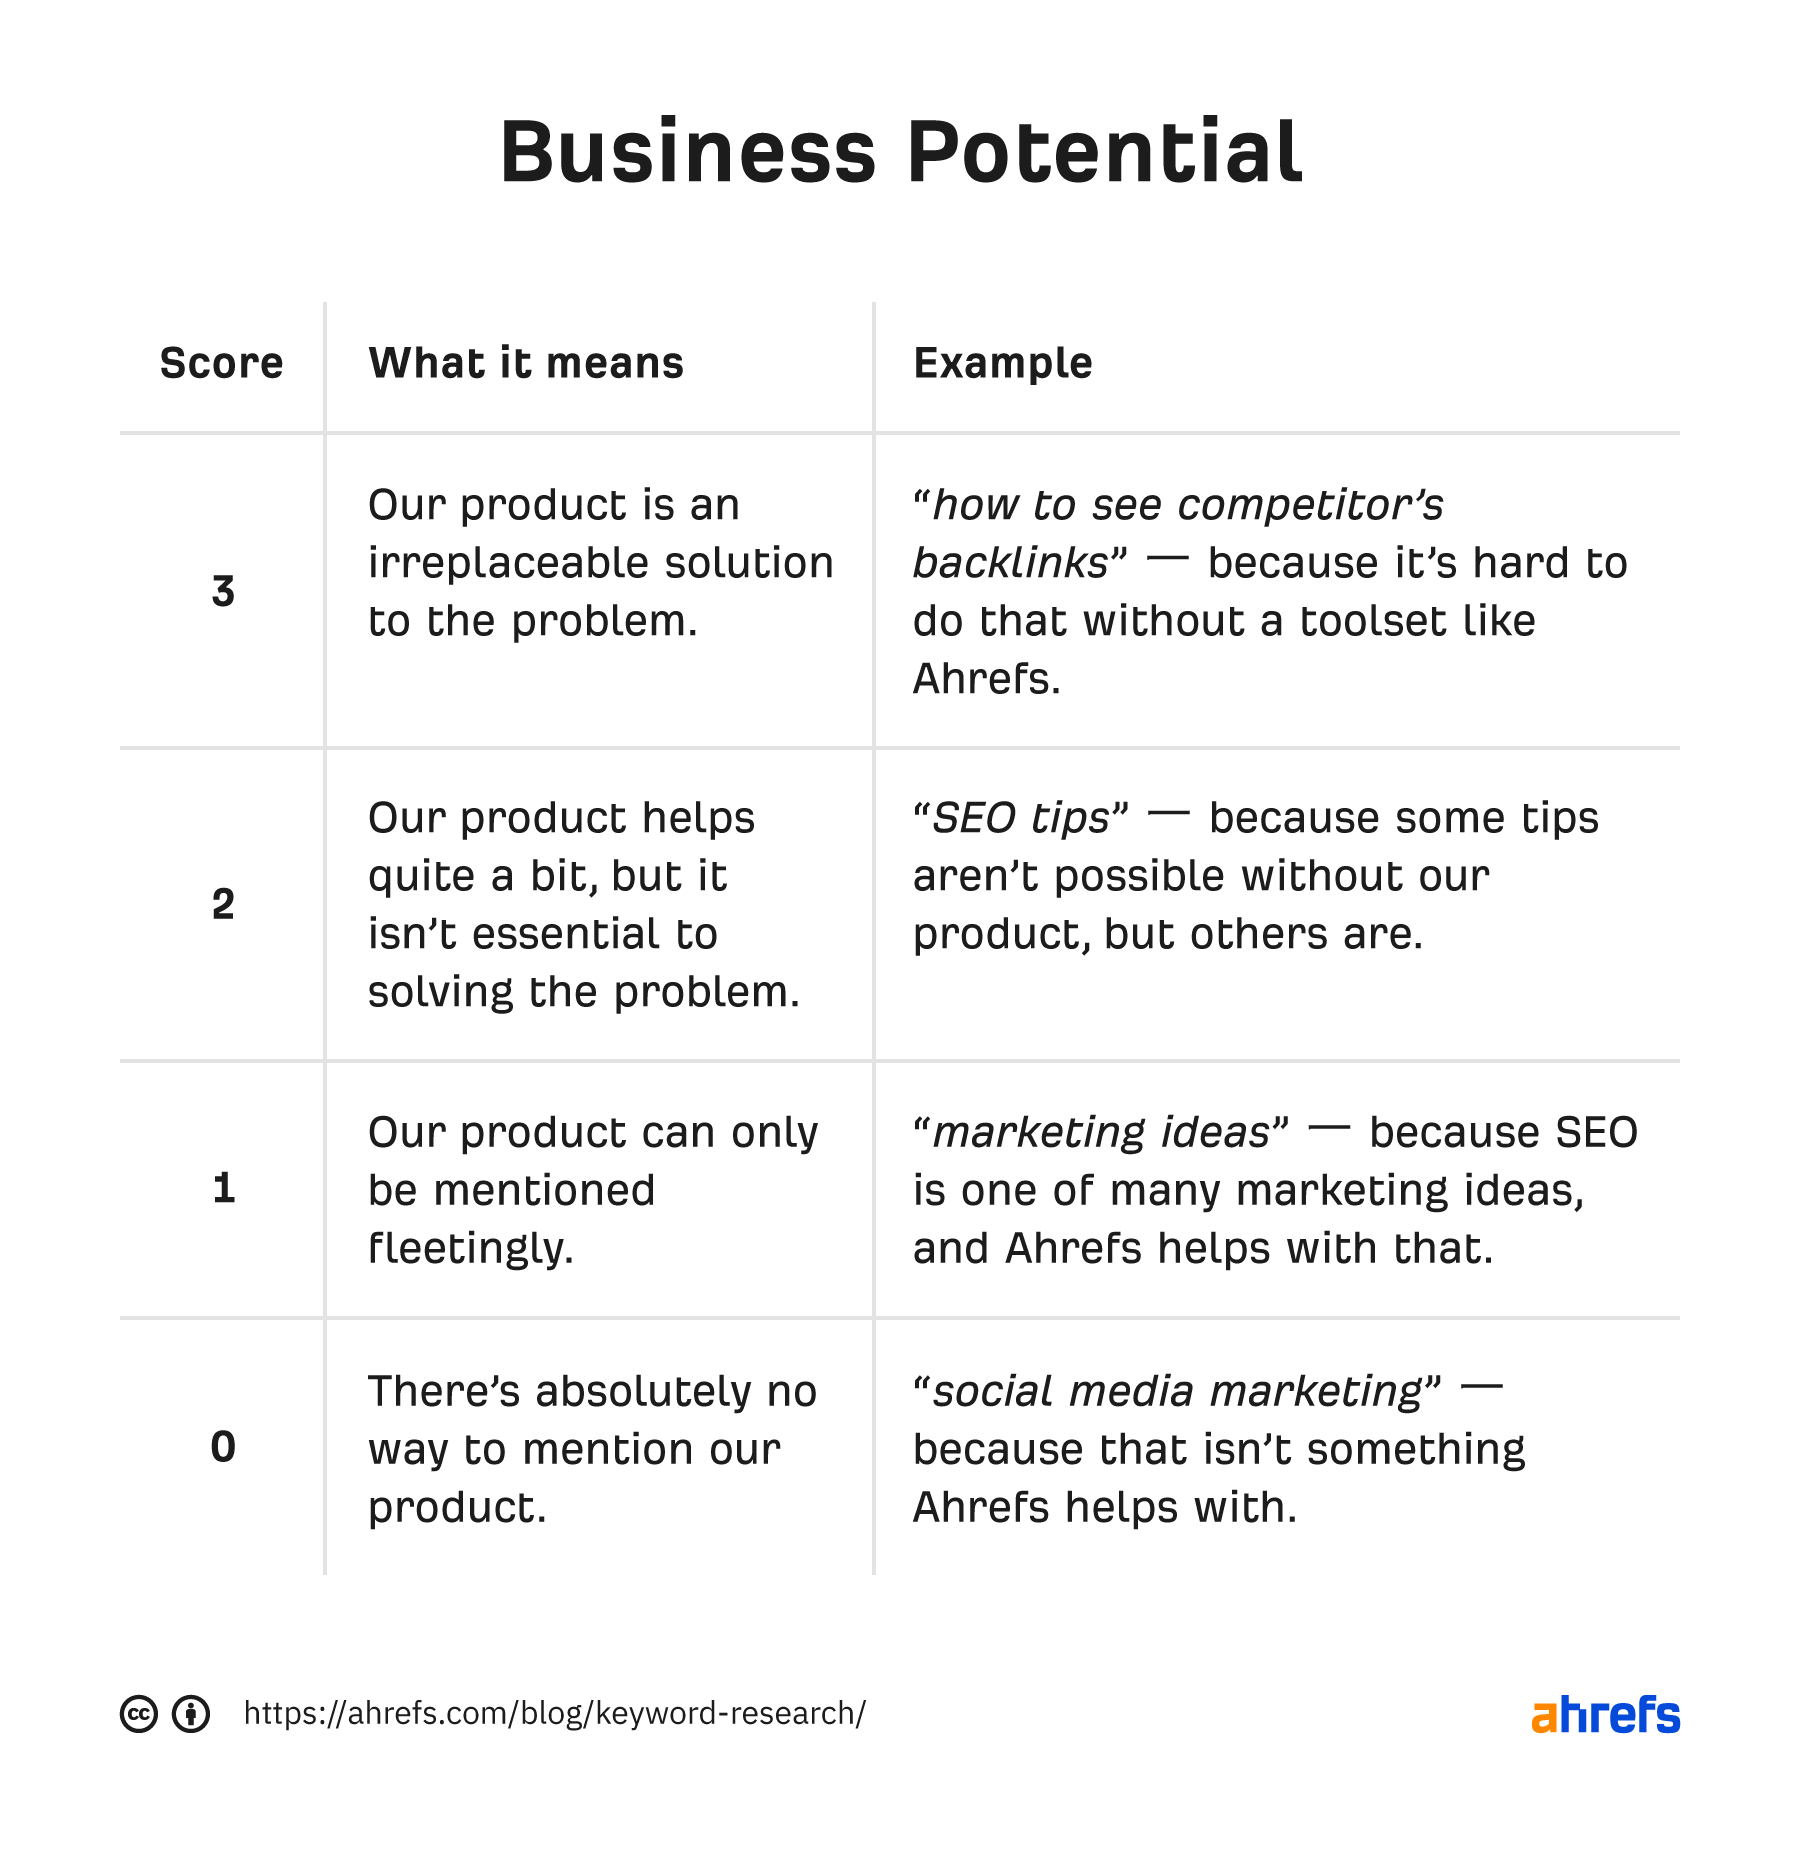 A table showing how to score a topic's business potential